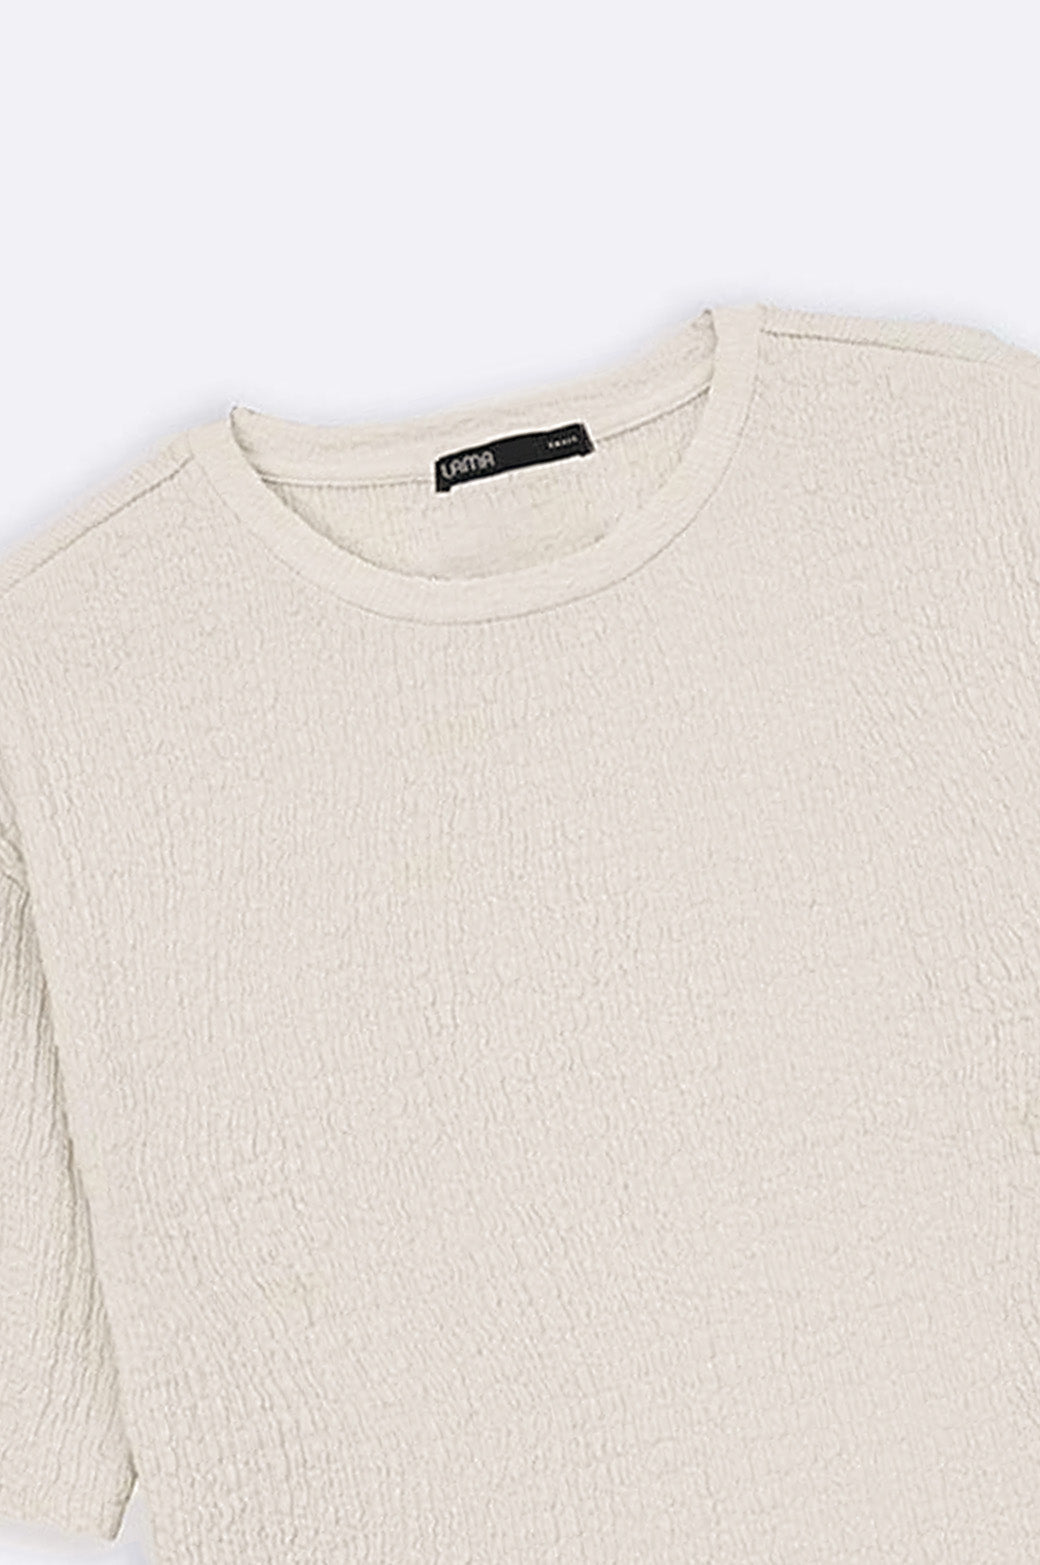 OFF WHITE TEXTURED STRETCHY TOP